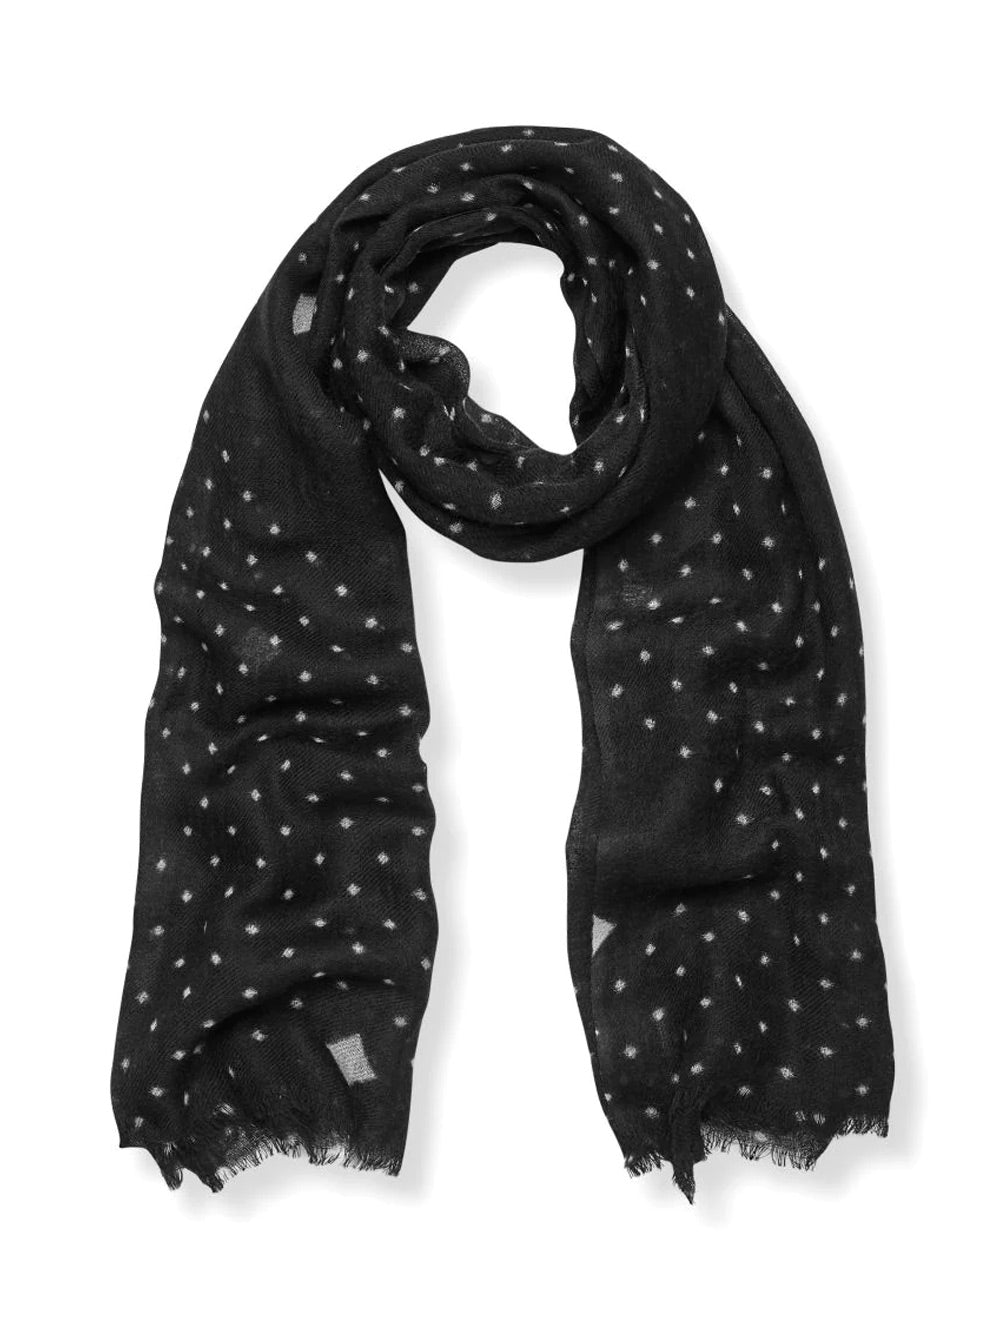 THE SCARF CO JEMIMA WOOL SCARF